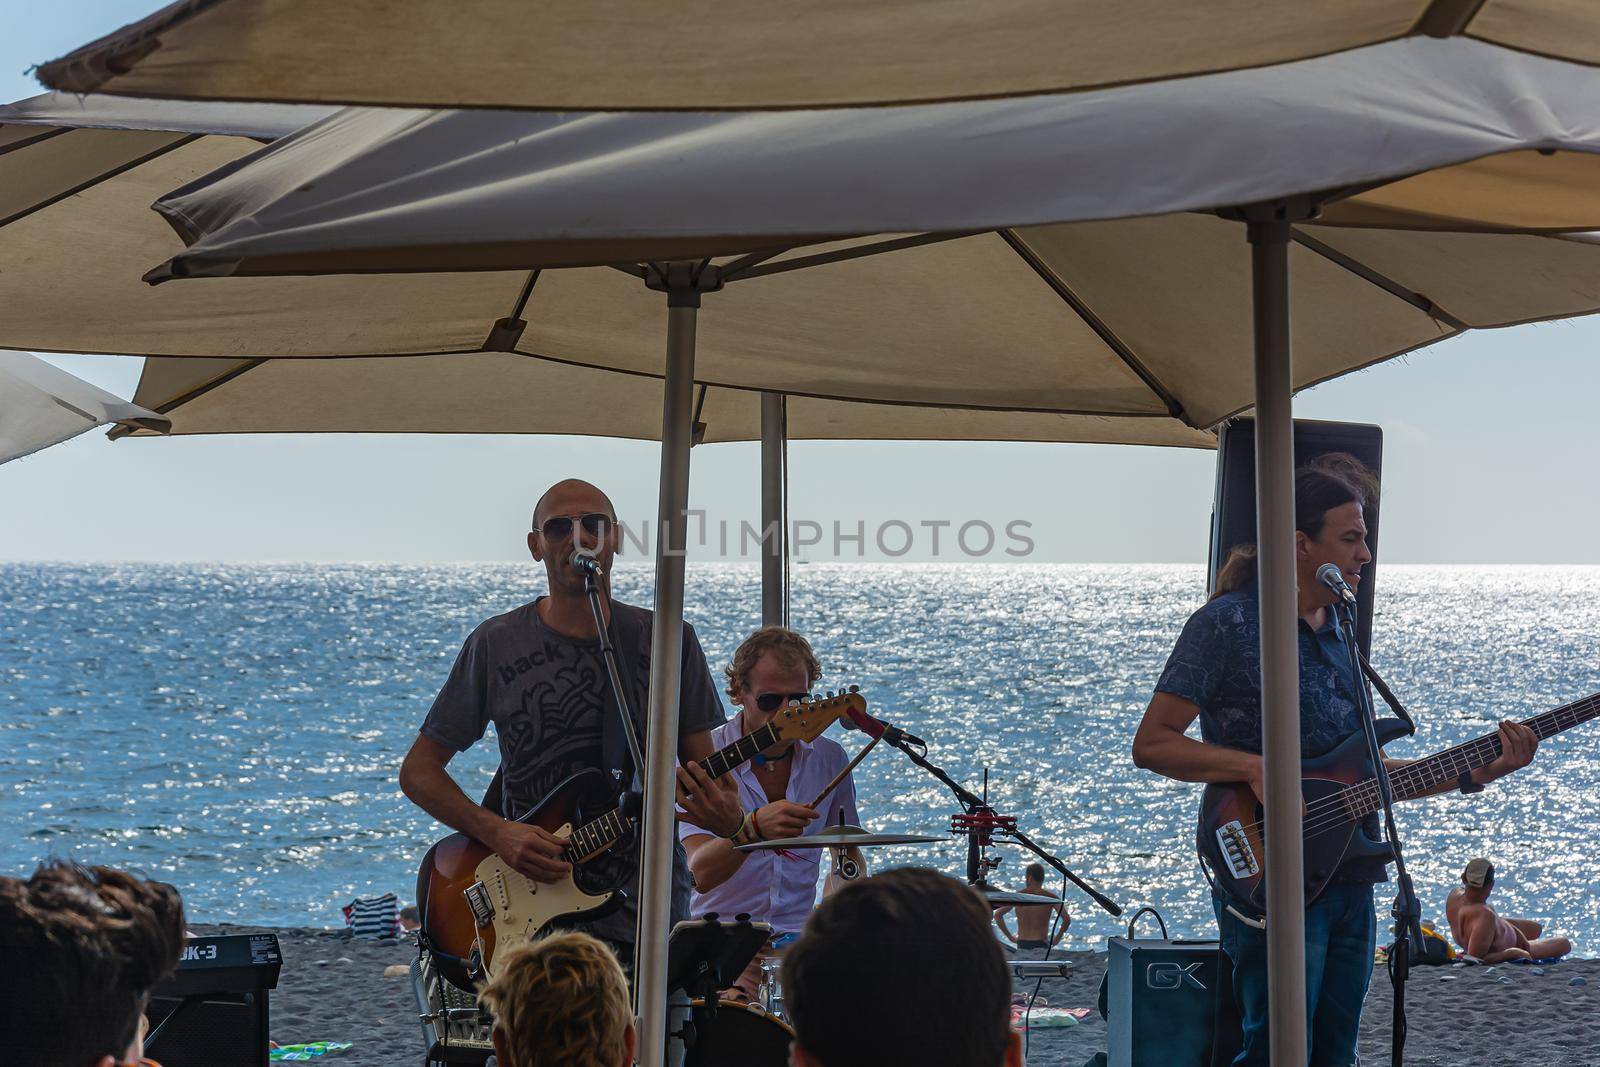 Spain, Tenerife - 09/17/2016: performance by a musical group on the ocean. Stock photography